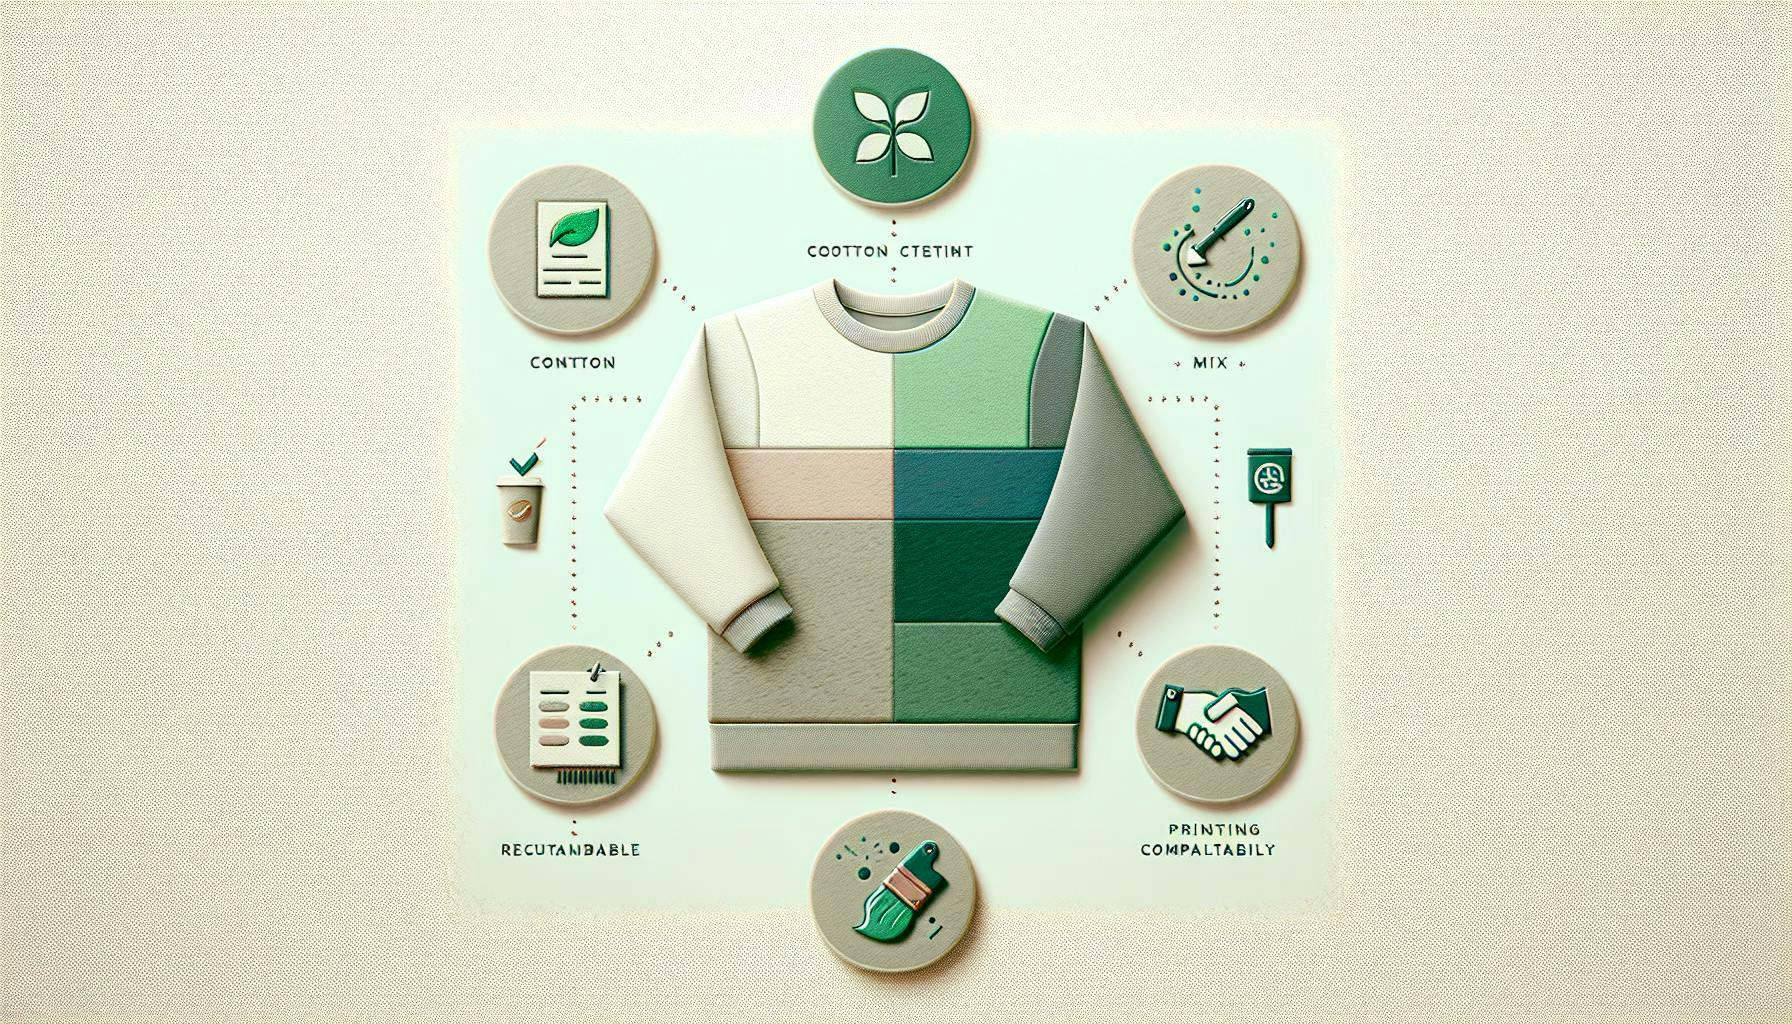 High Quality Sweatshirts for Printing: Selection Guide